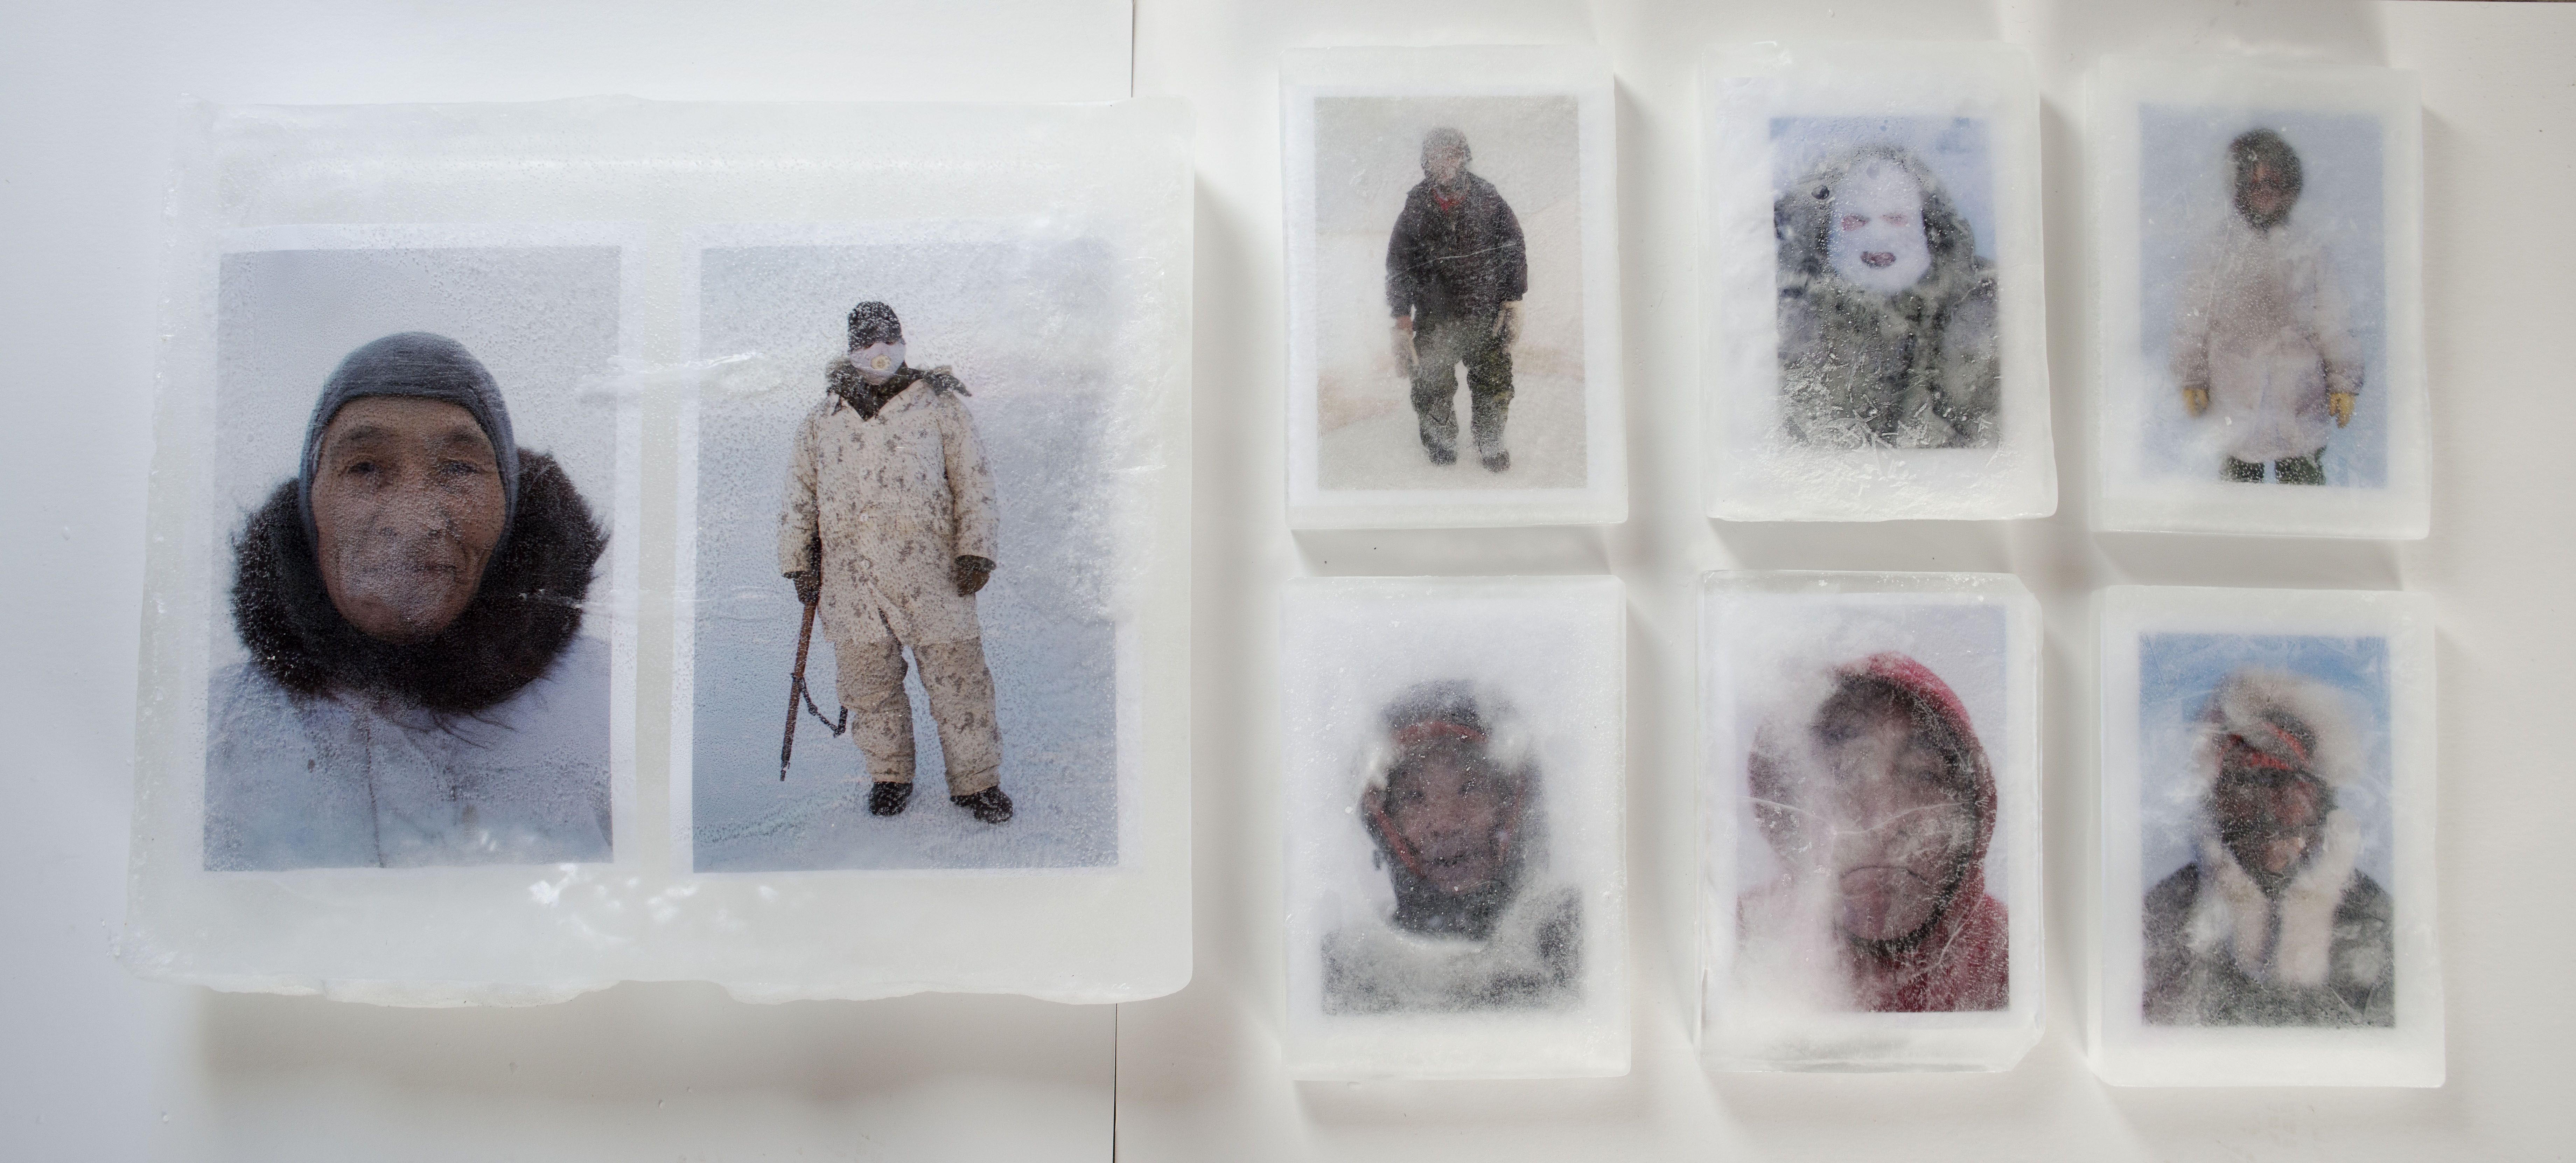 Louie Palu's work photographs the Inuit communities of the high Artic before freezing them into large blocks of ice to portray the connection between their environment and their identity. 